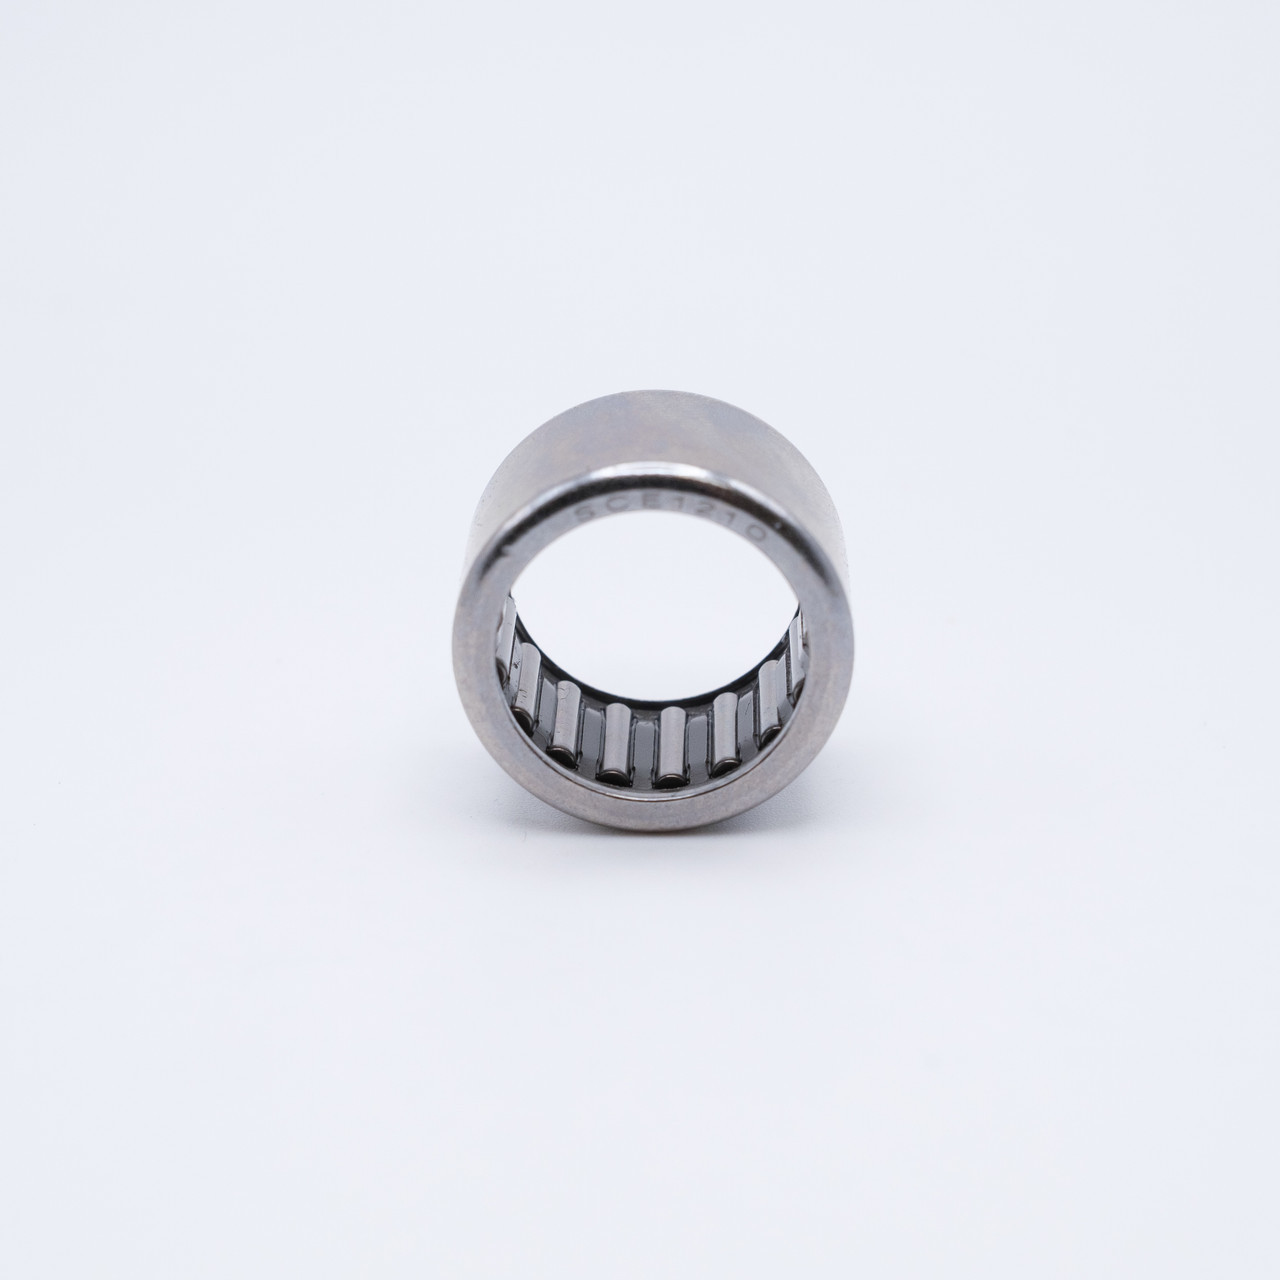 BA-1416ZOH Needle Roller Bearing 7/8x1-1/8x1 Front View